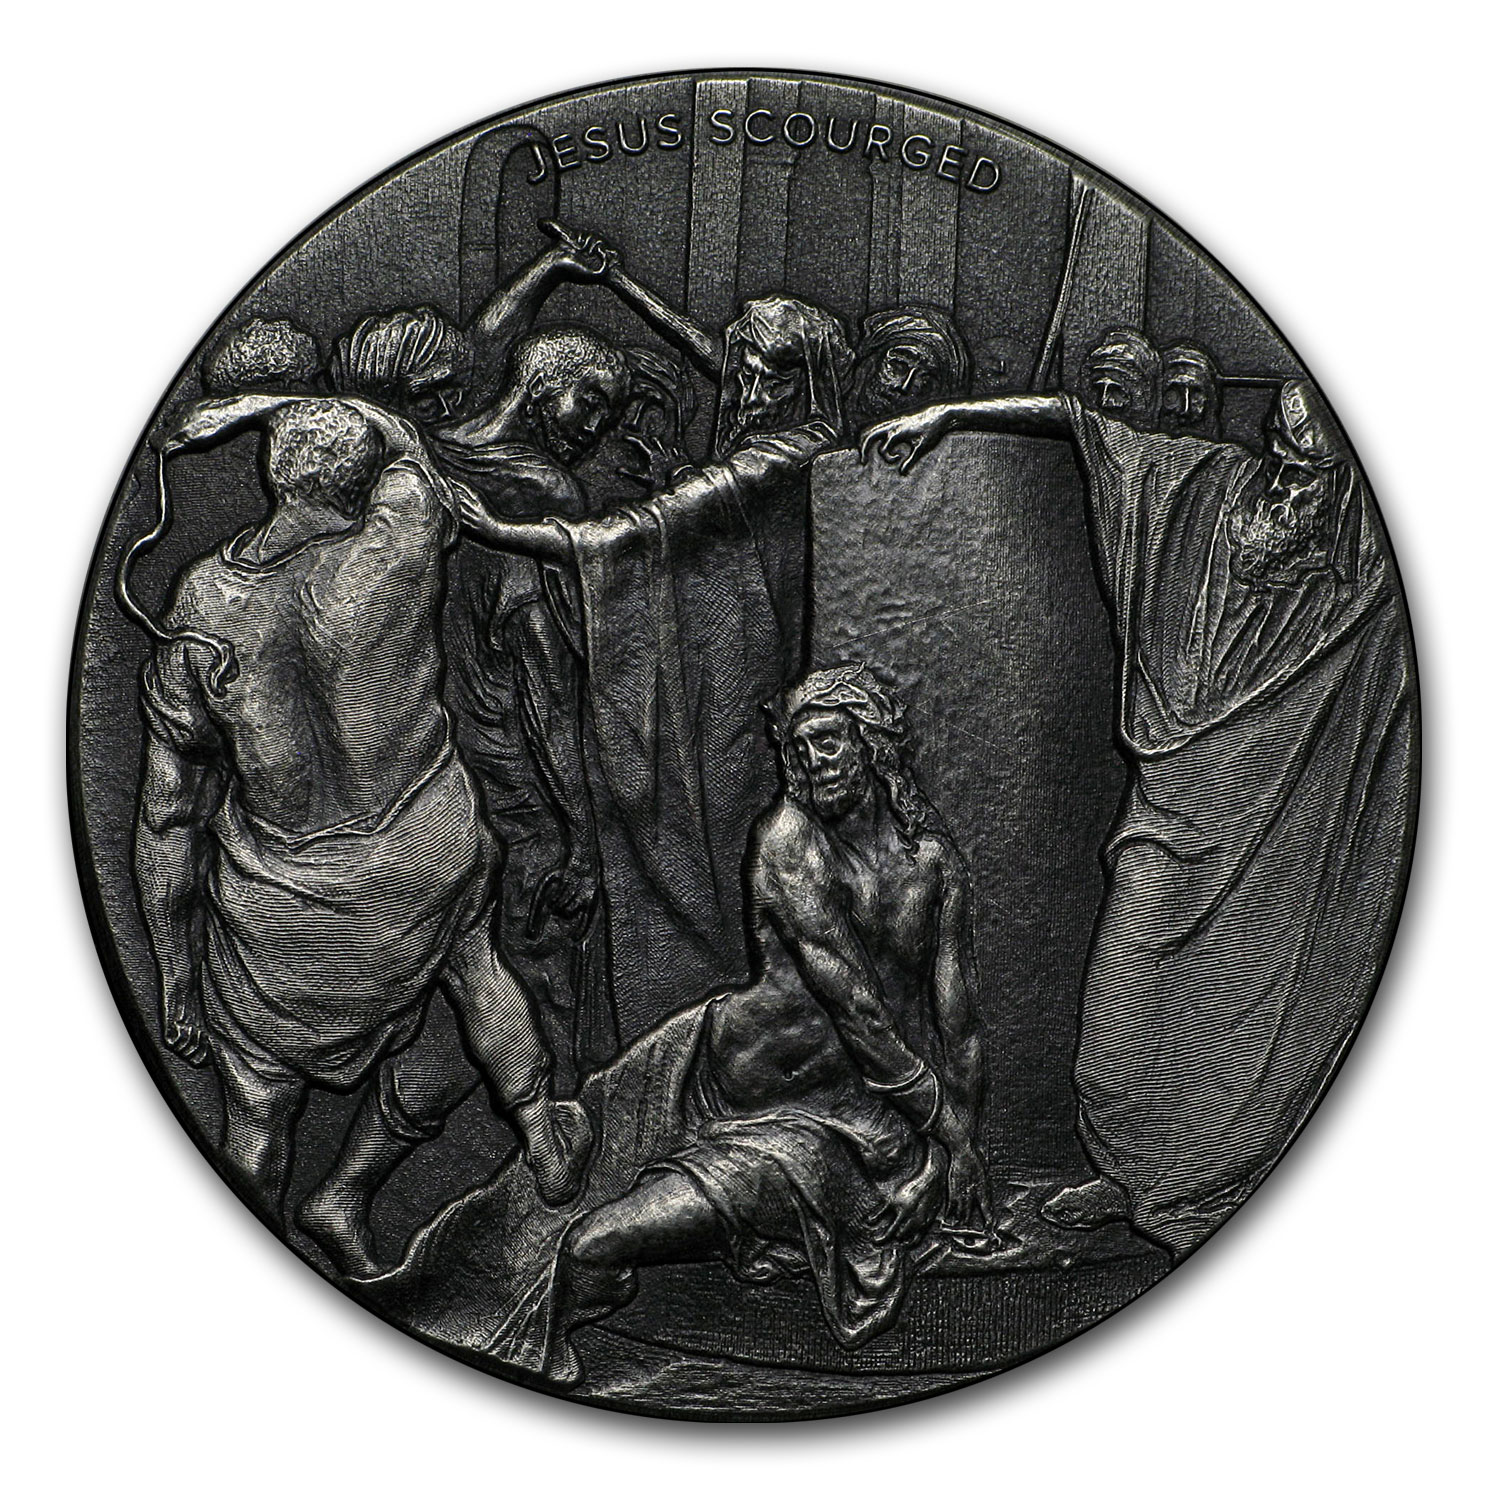 Buy 2018 2 oz Silver Coin - Biblical Series (Jesus Scourged) - Click Image to Close